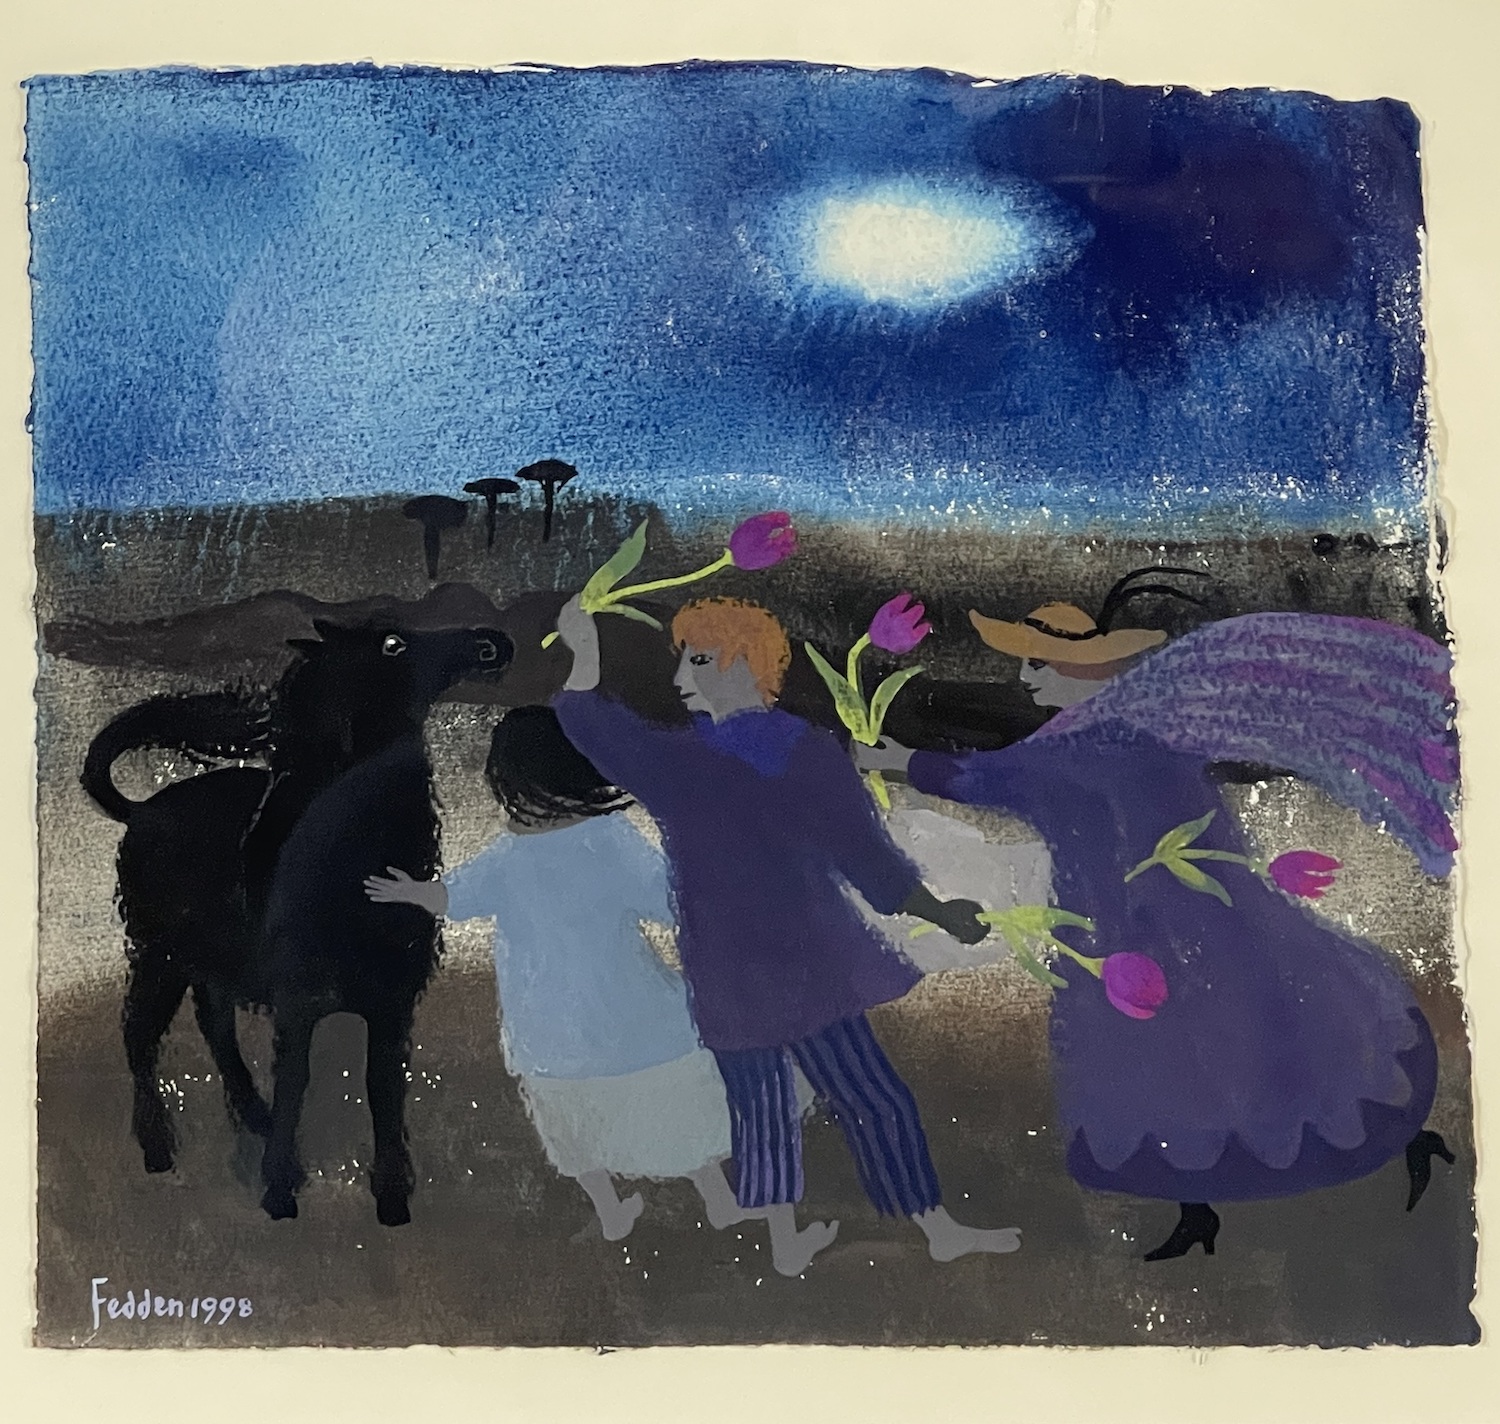 The Black Horse by Mary Fedden